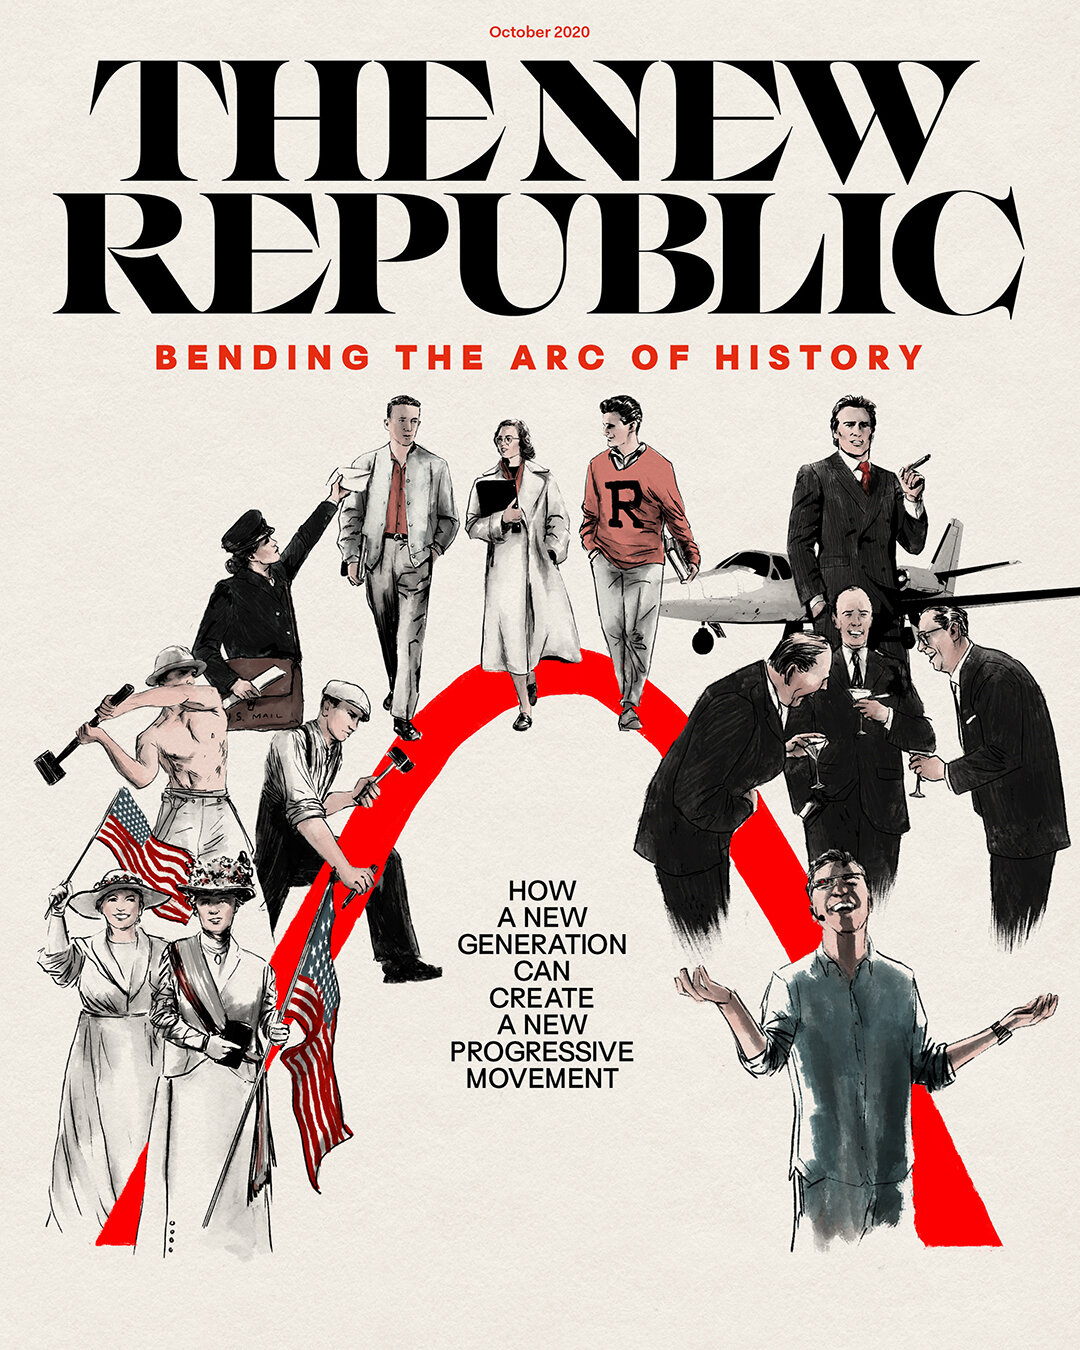 "The Upswing", Cover illustration for The New Republic